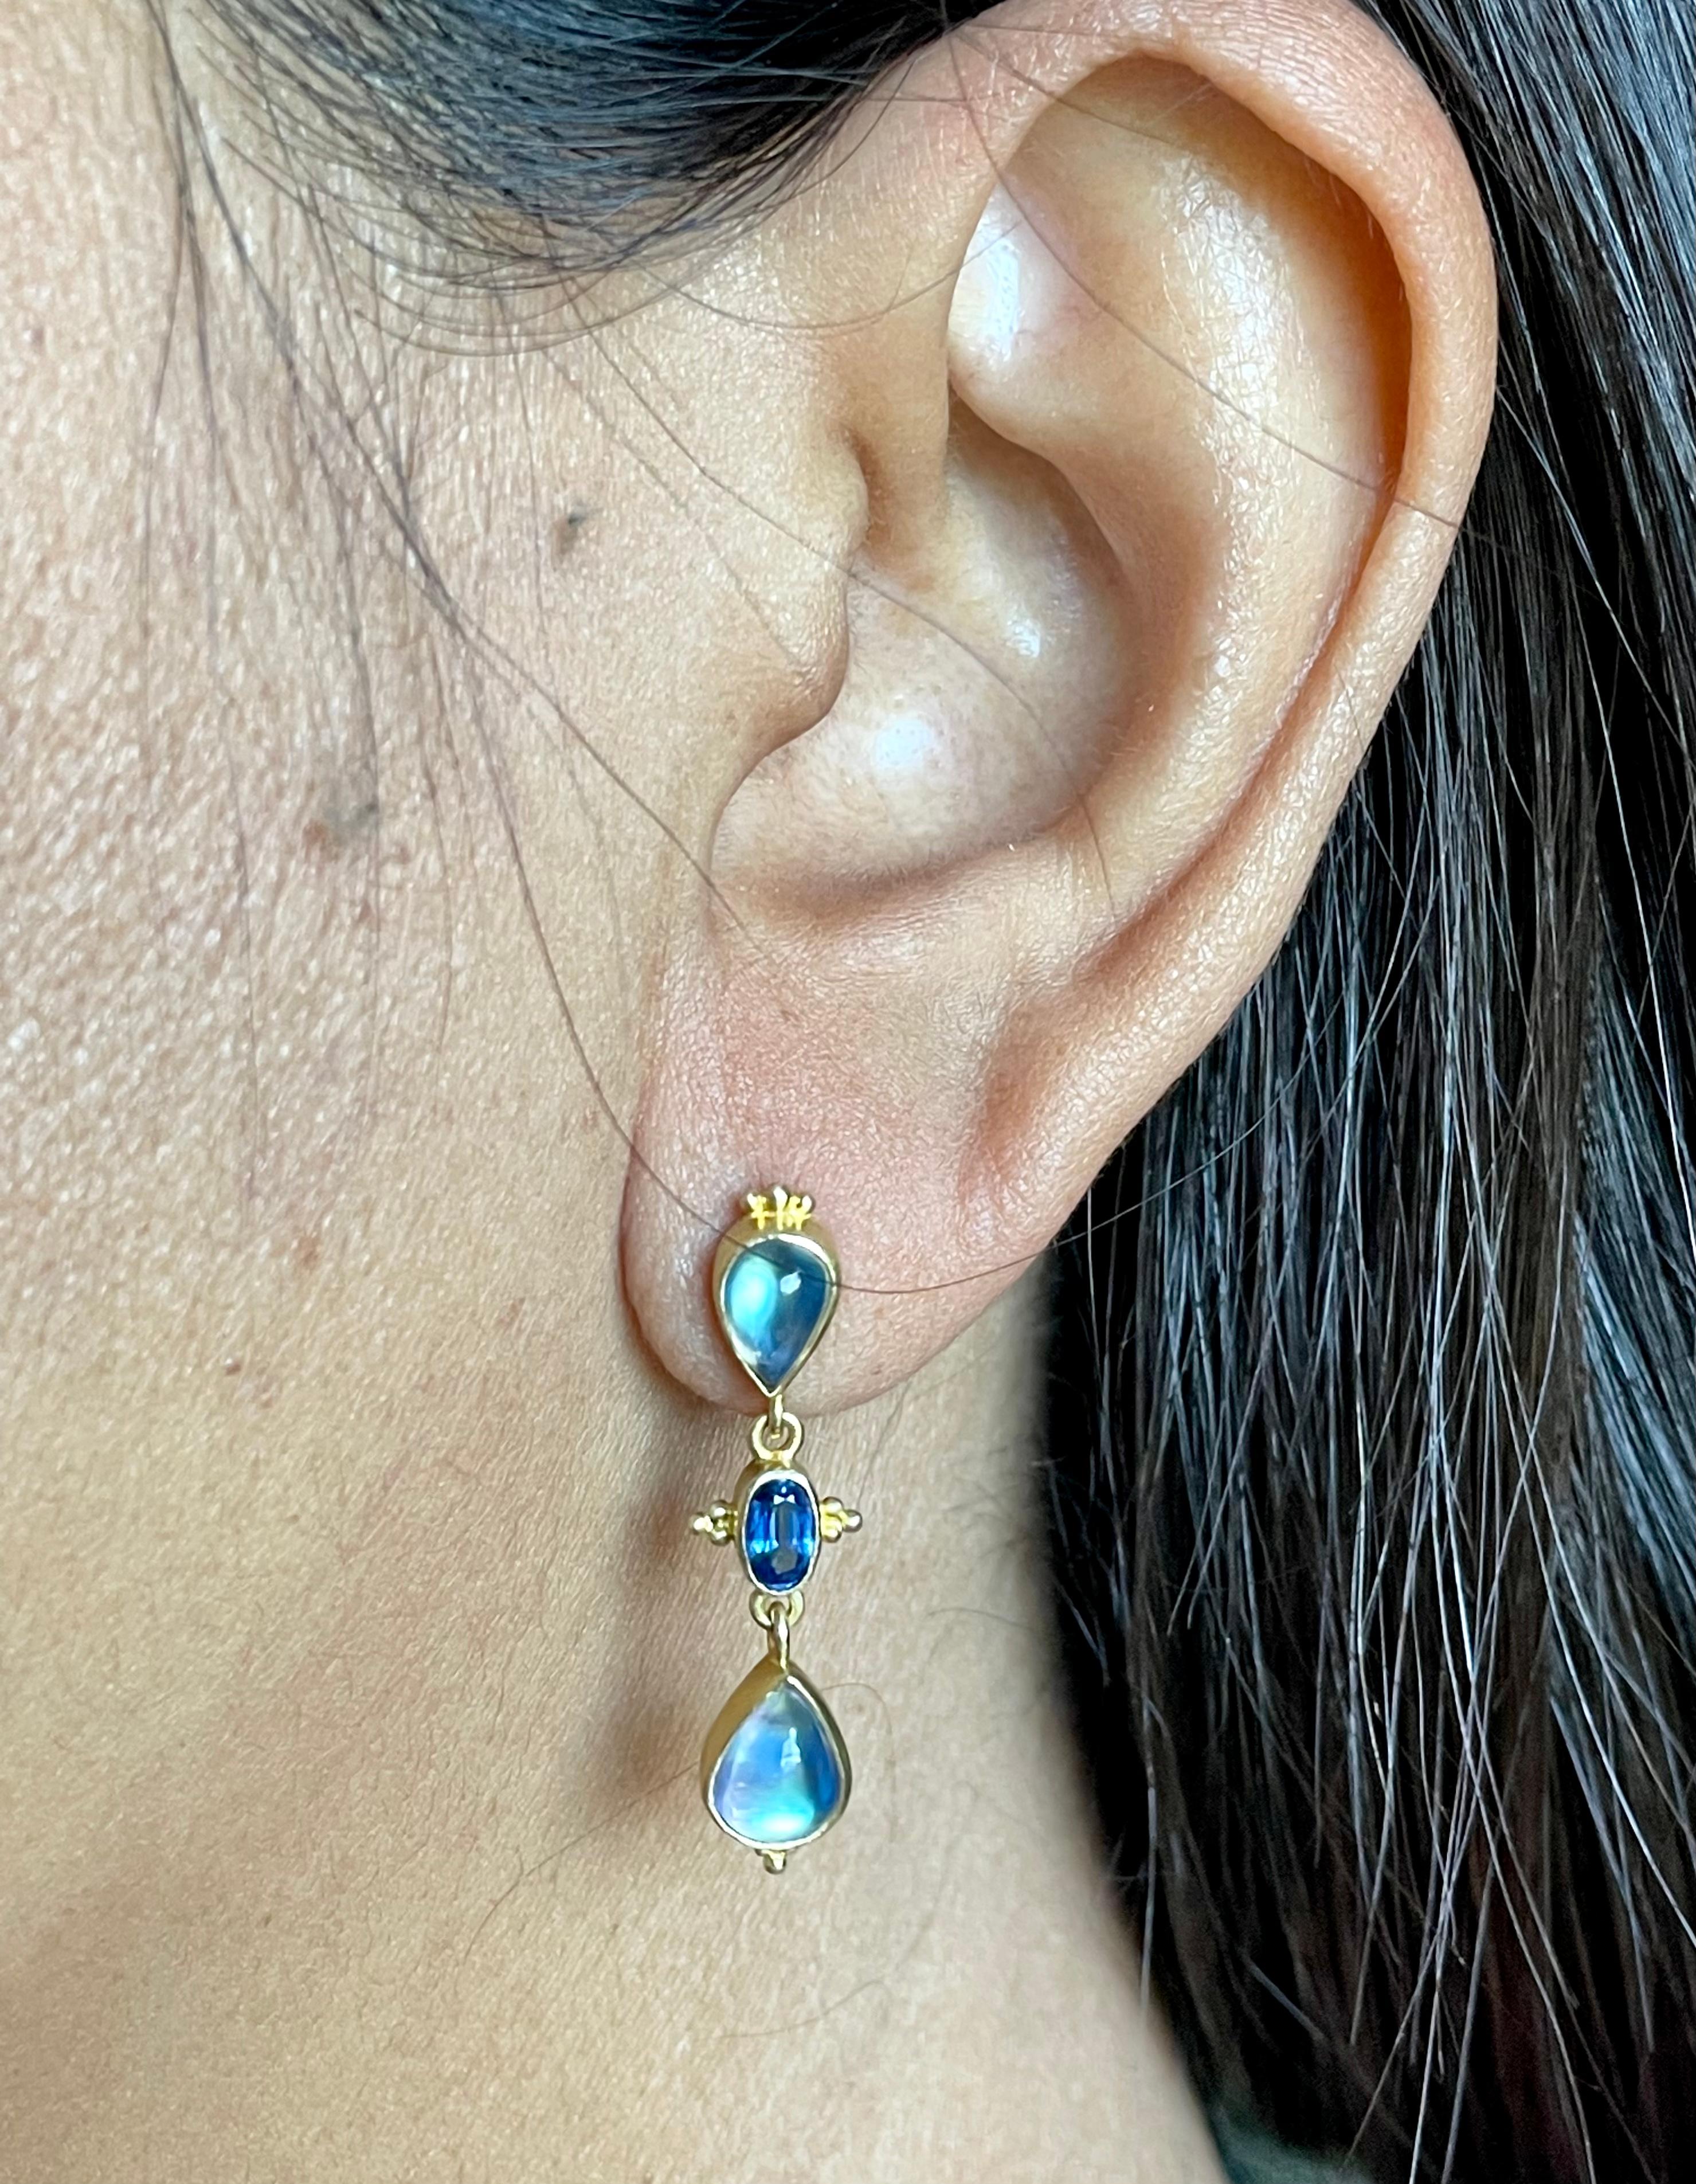 Matching shimmering 5 x 7 and 6 x9 mm pear shaped rainbow moonstones face away from each other with brilliant blue 3 x 5 mm faceted Kyanites suspended between in this wonderful design.  Small triangular granulation accents the symmetry. You will